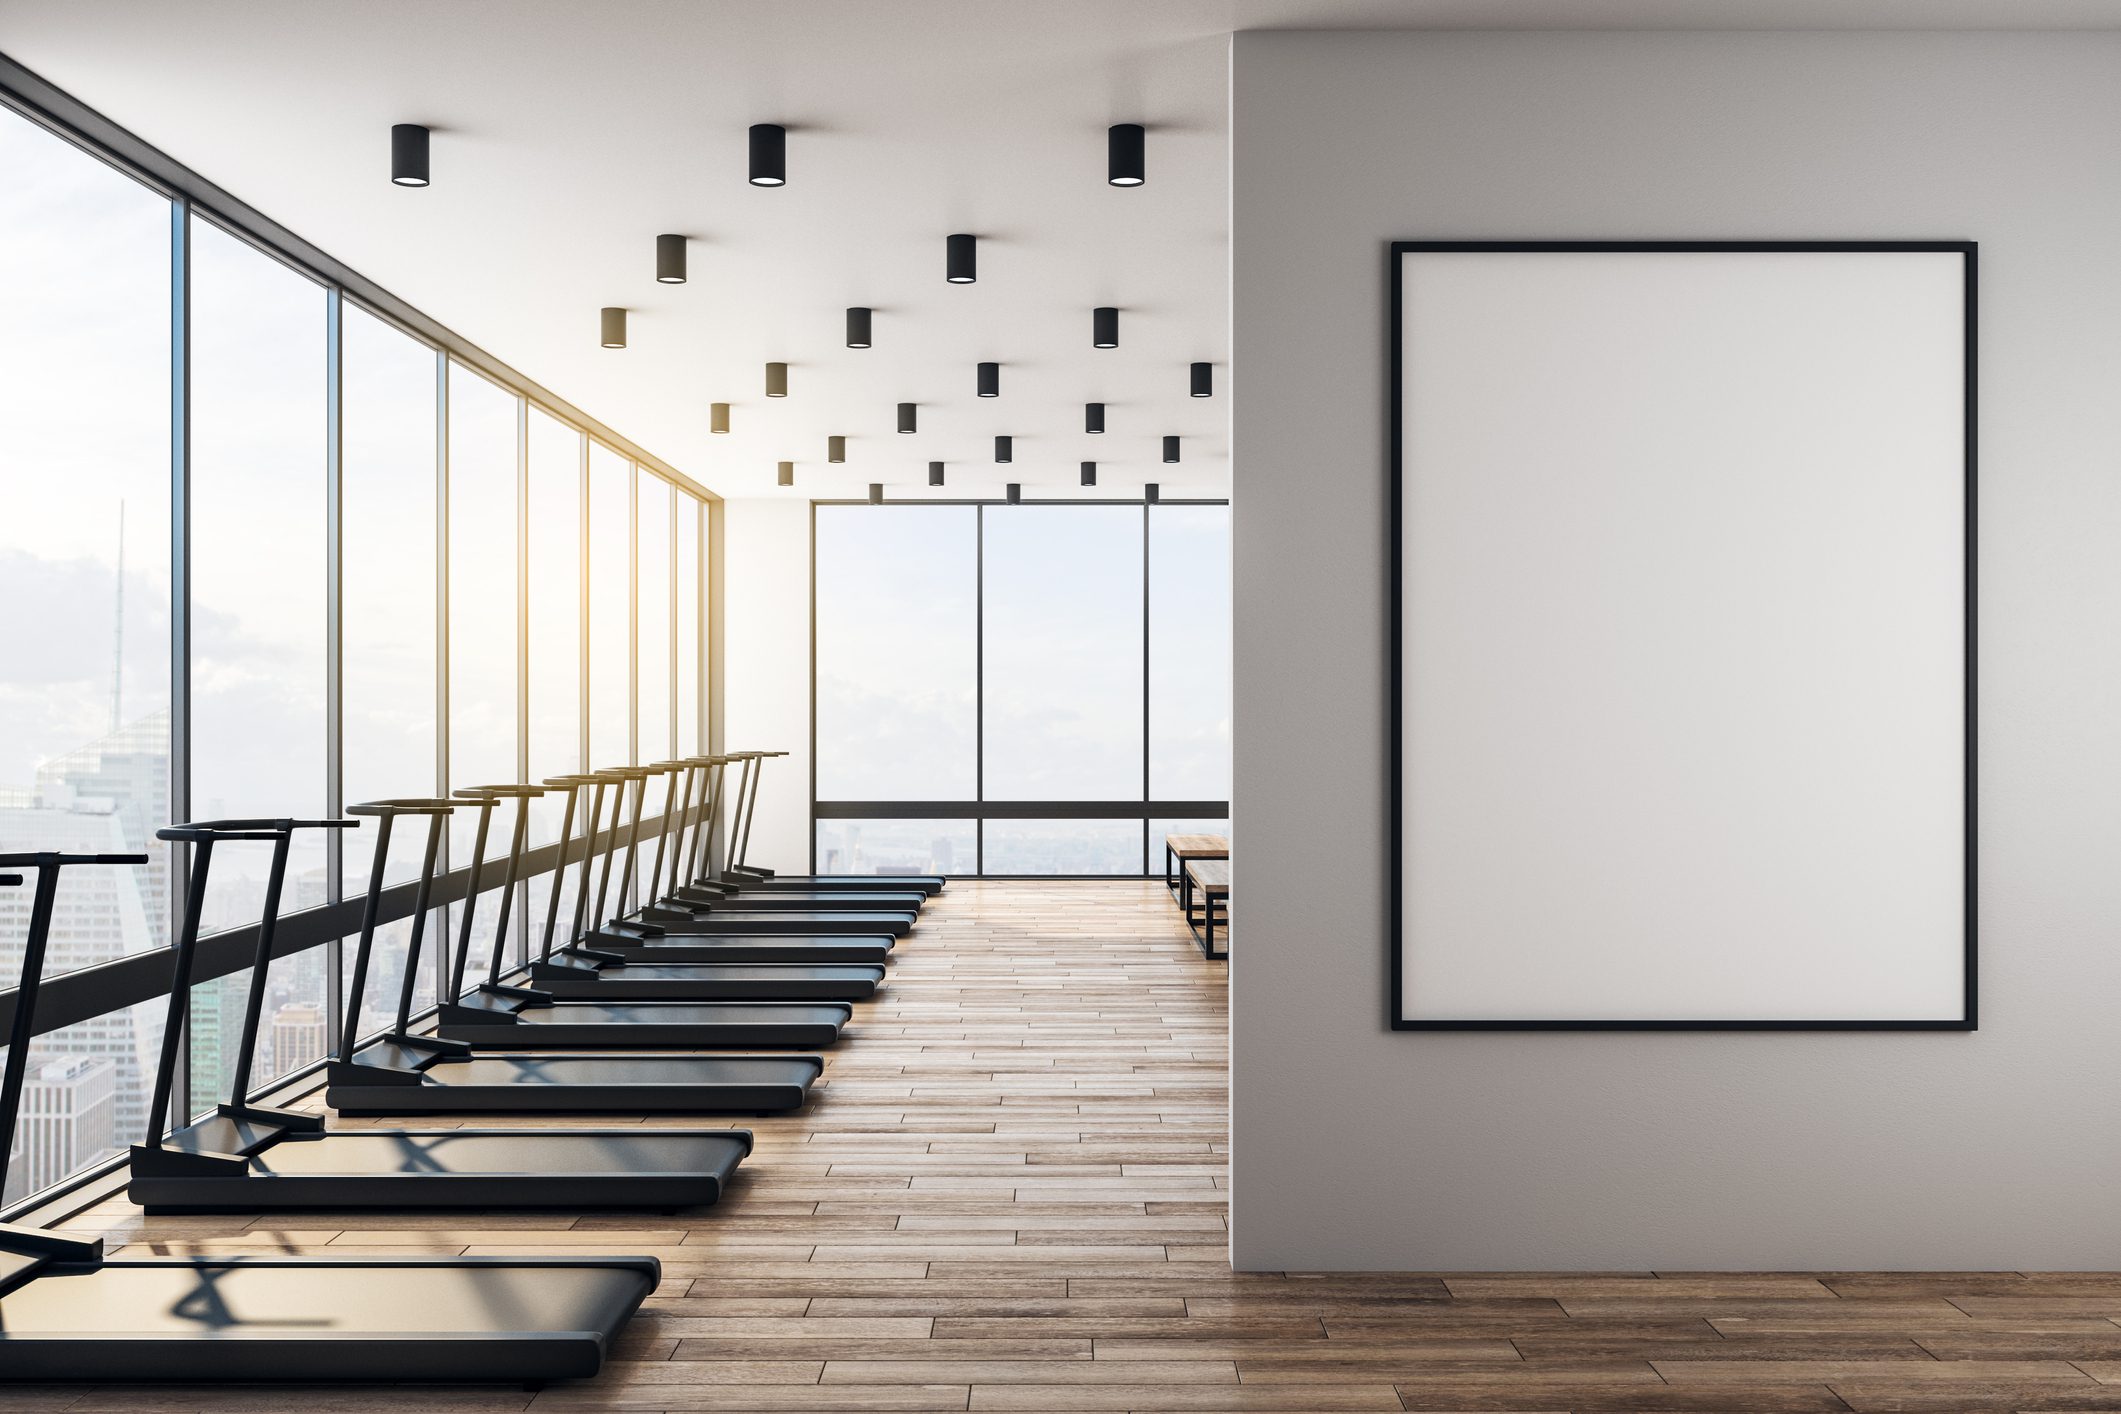 White mock up poster in modern gym with scandinavian style interior.